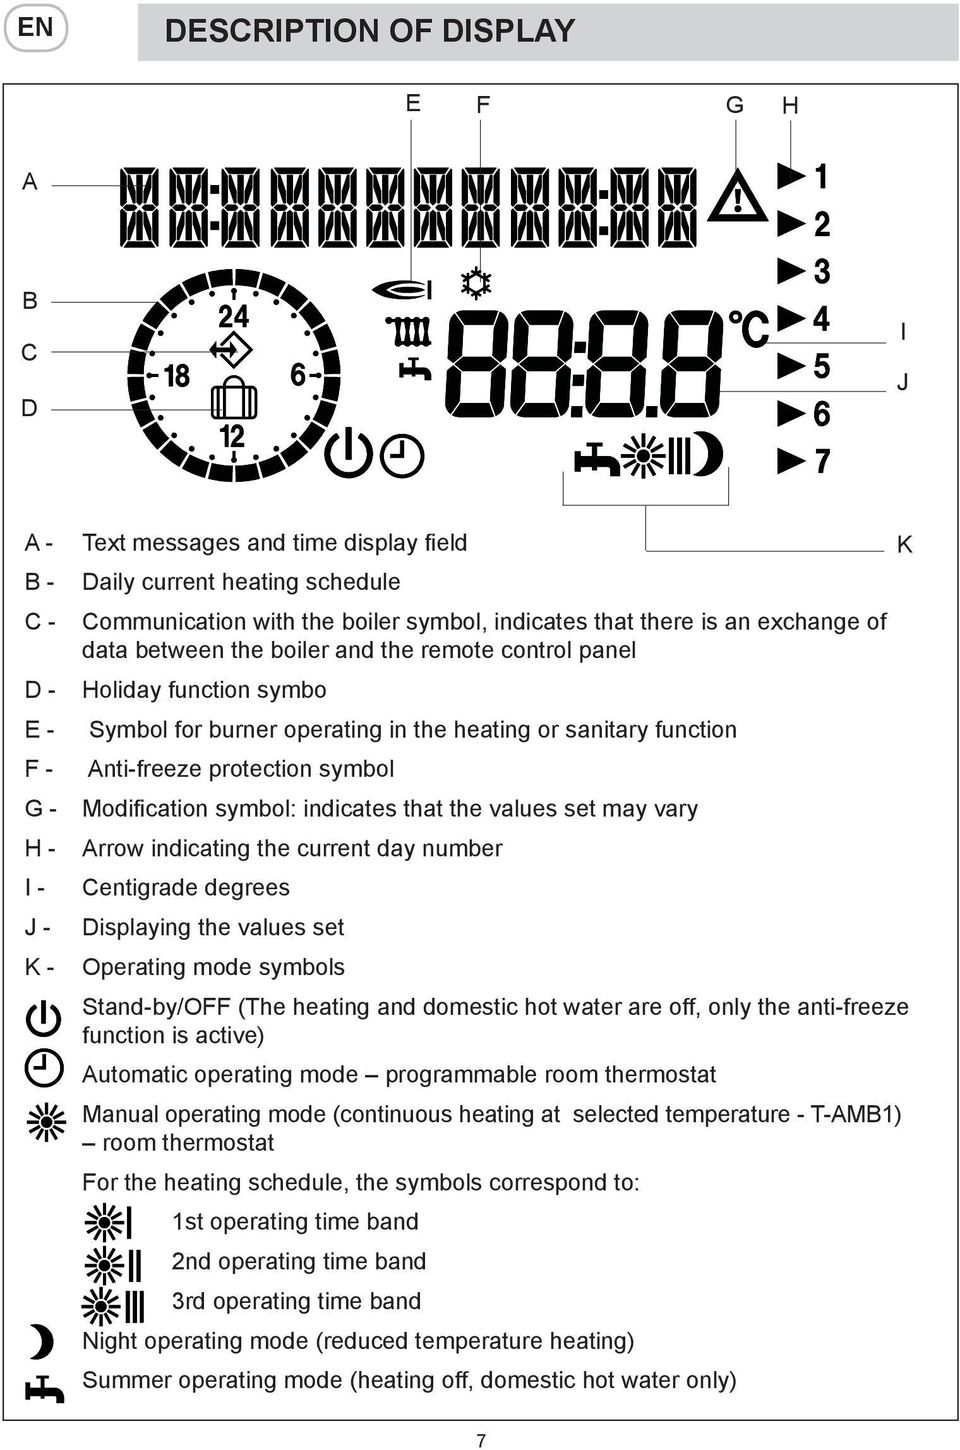 protection symbol Modification symbol: indicates that the values set may vary Arrow indicating the current day number Centigrade degrees Displaying the values set Operating mode symbols Stand-by/OFF